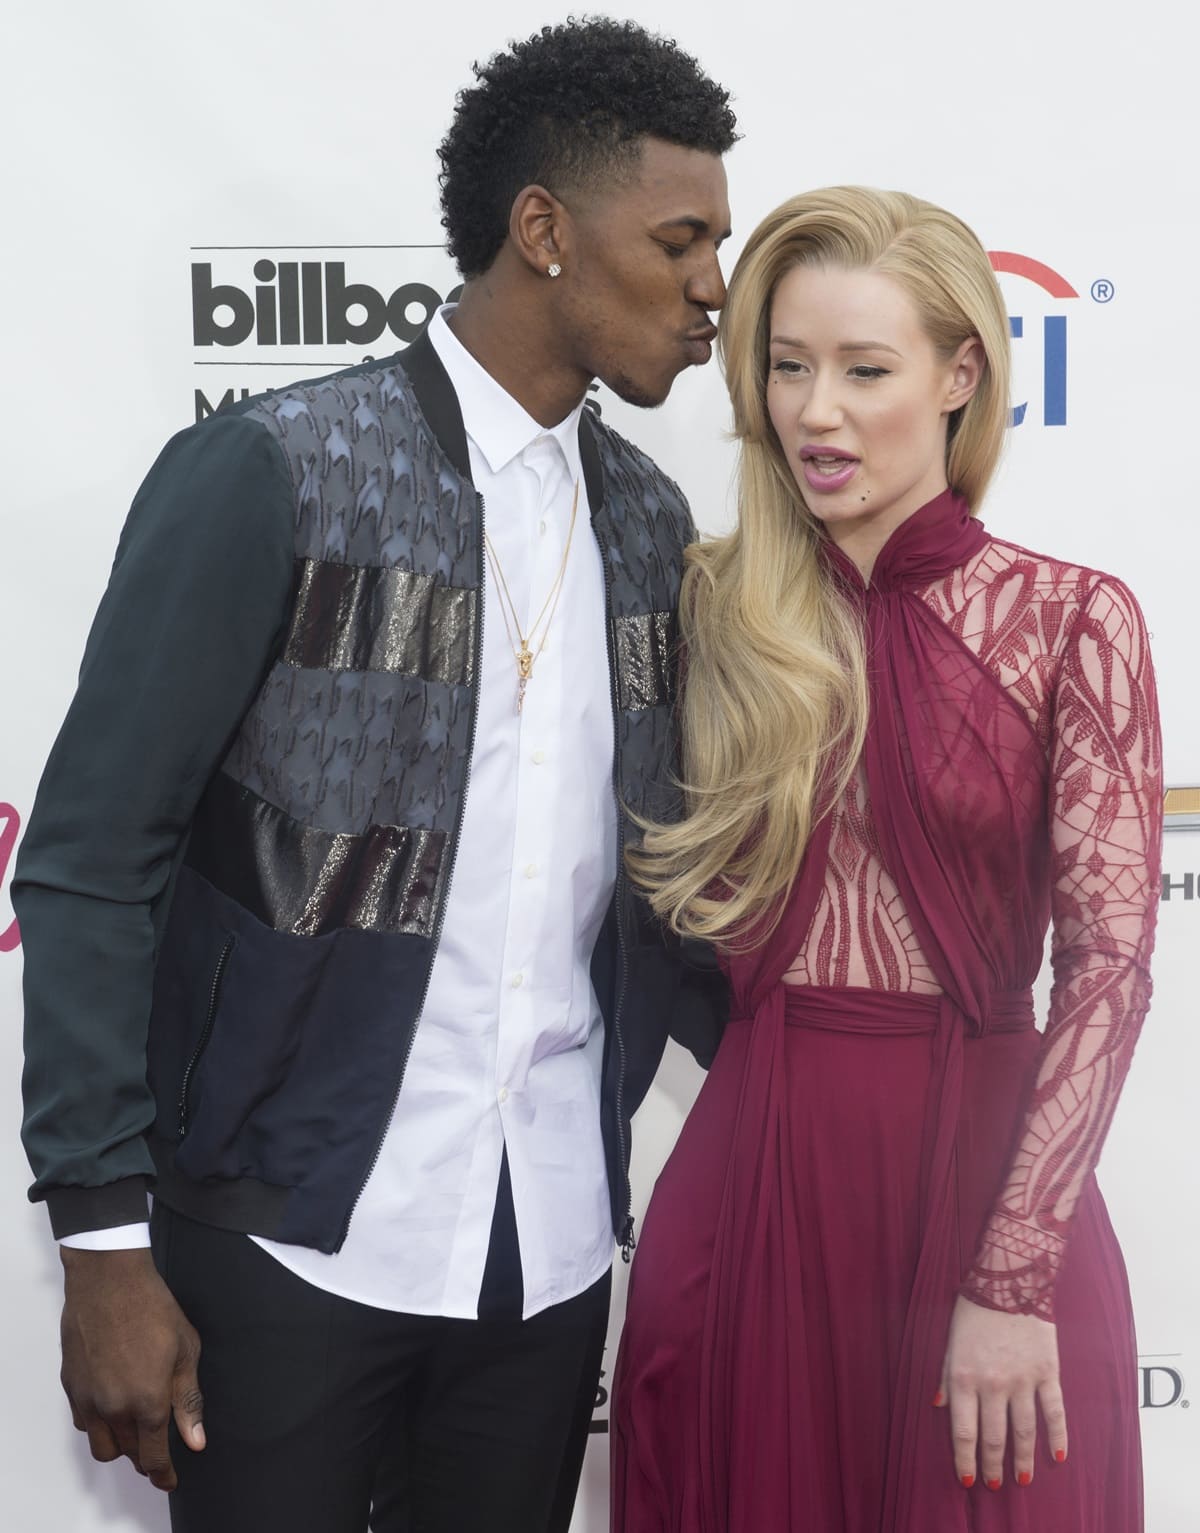 Former NBA player Nick Young's personal life became a subject of speculation when a video, secretly recorded by his former Lakers teammate D'Angelo Russell, leaked in March 2016, showing Young discussing relations with another woman and leading to accusations of cheating on his then-girlfriend Iggy Azalea